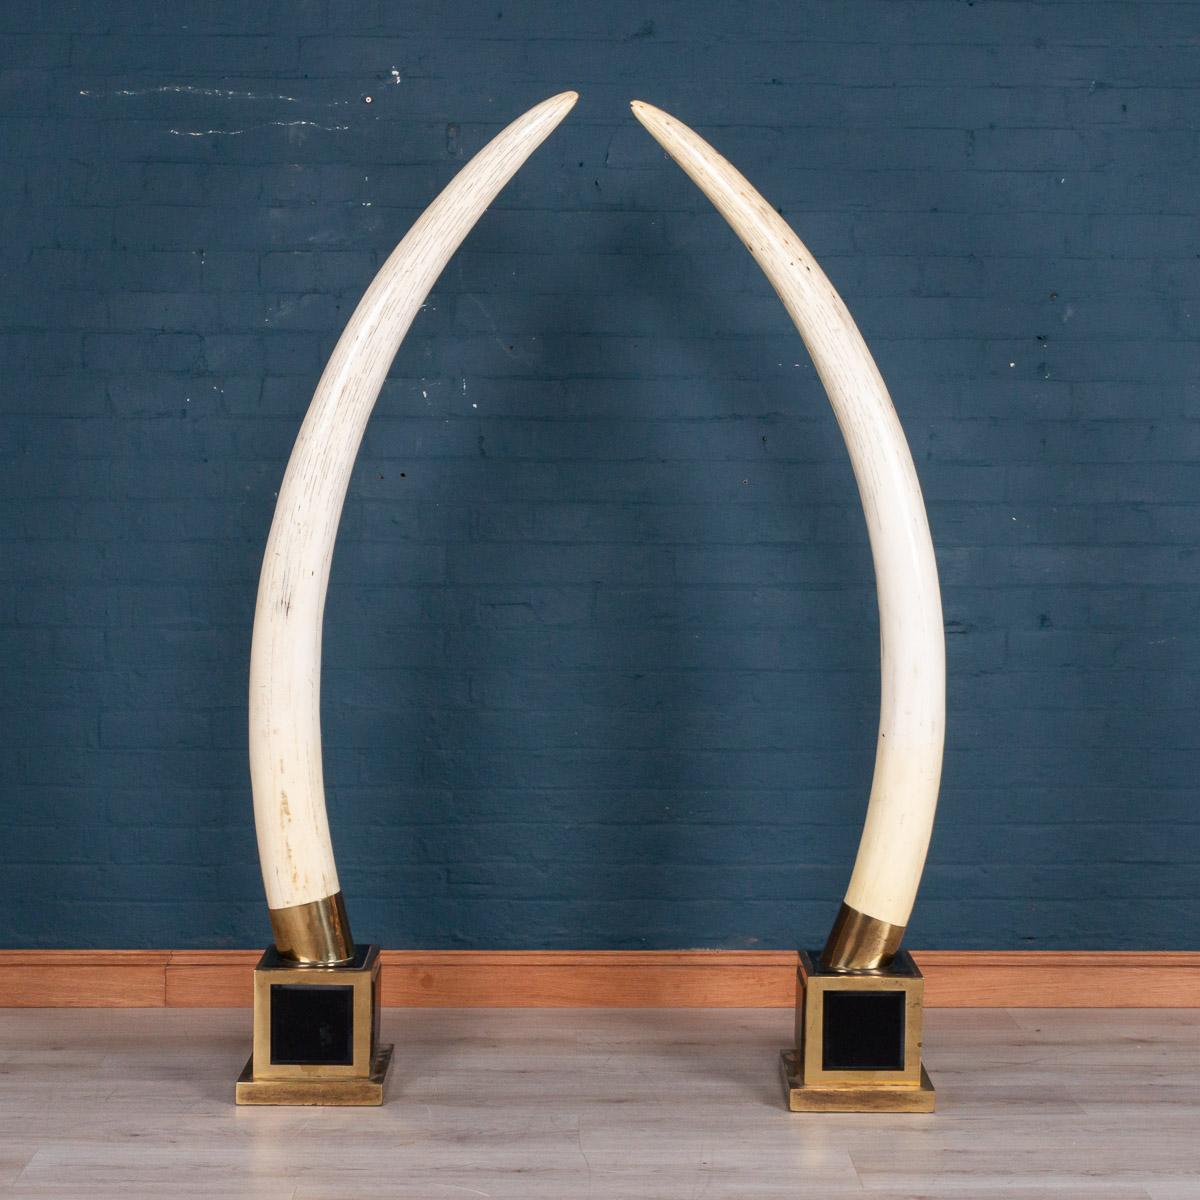 A wonderfully decorative pair of resin elephant tusks attributable to Maison Jansen, Paris, second half of the 20th century. The bases made out of black perspex and brass bound, of massive proportions standing at an impressive 184cm tall, a great